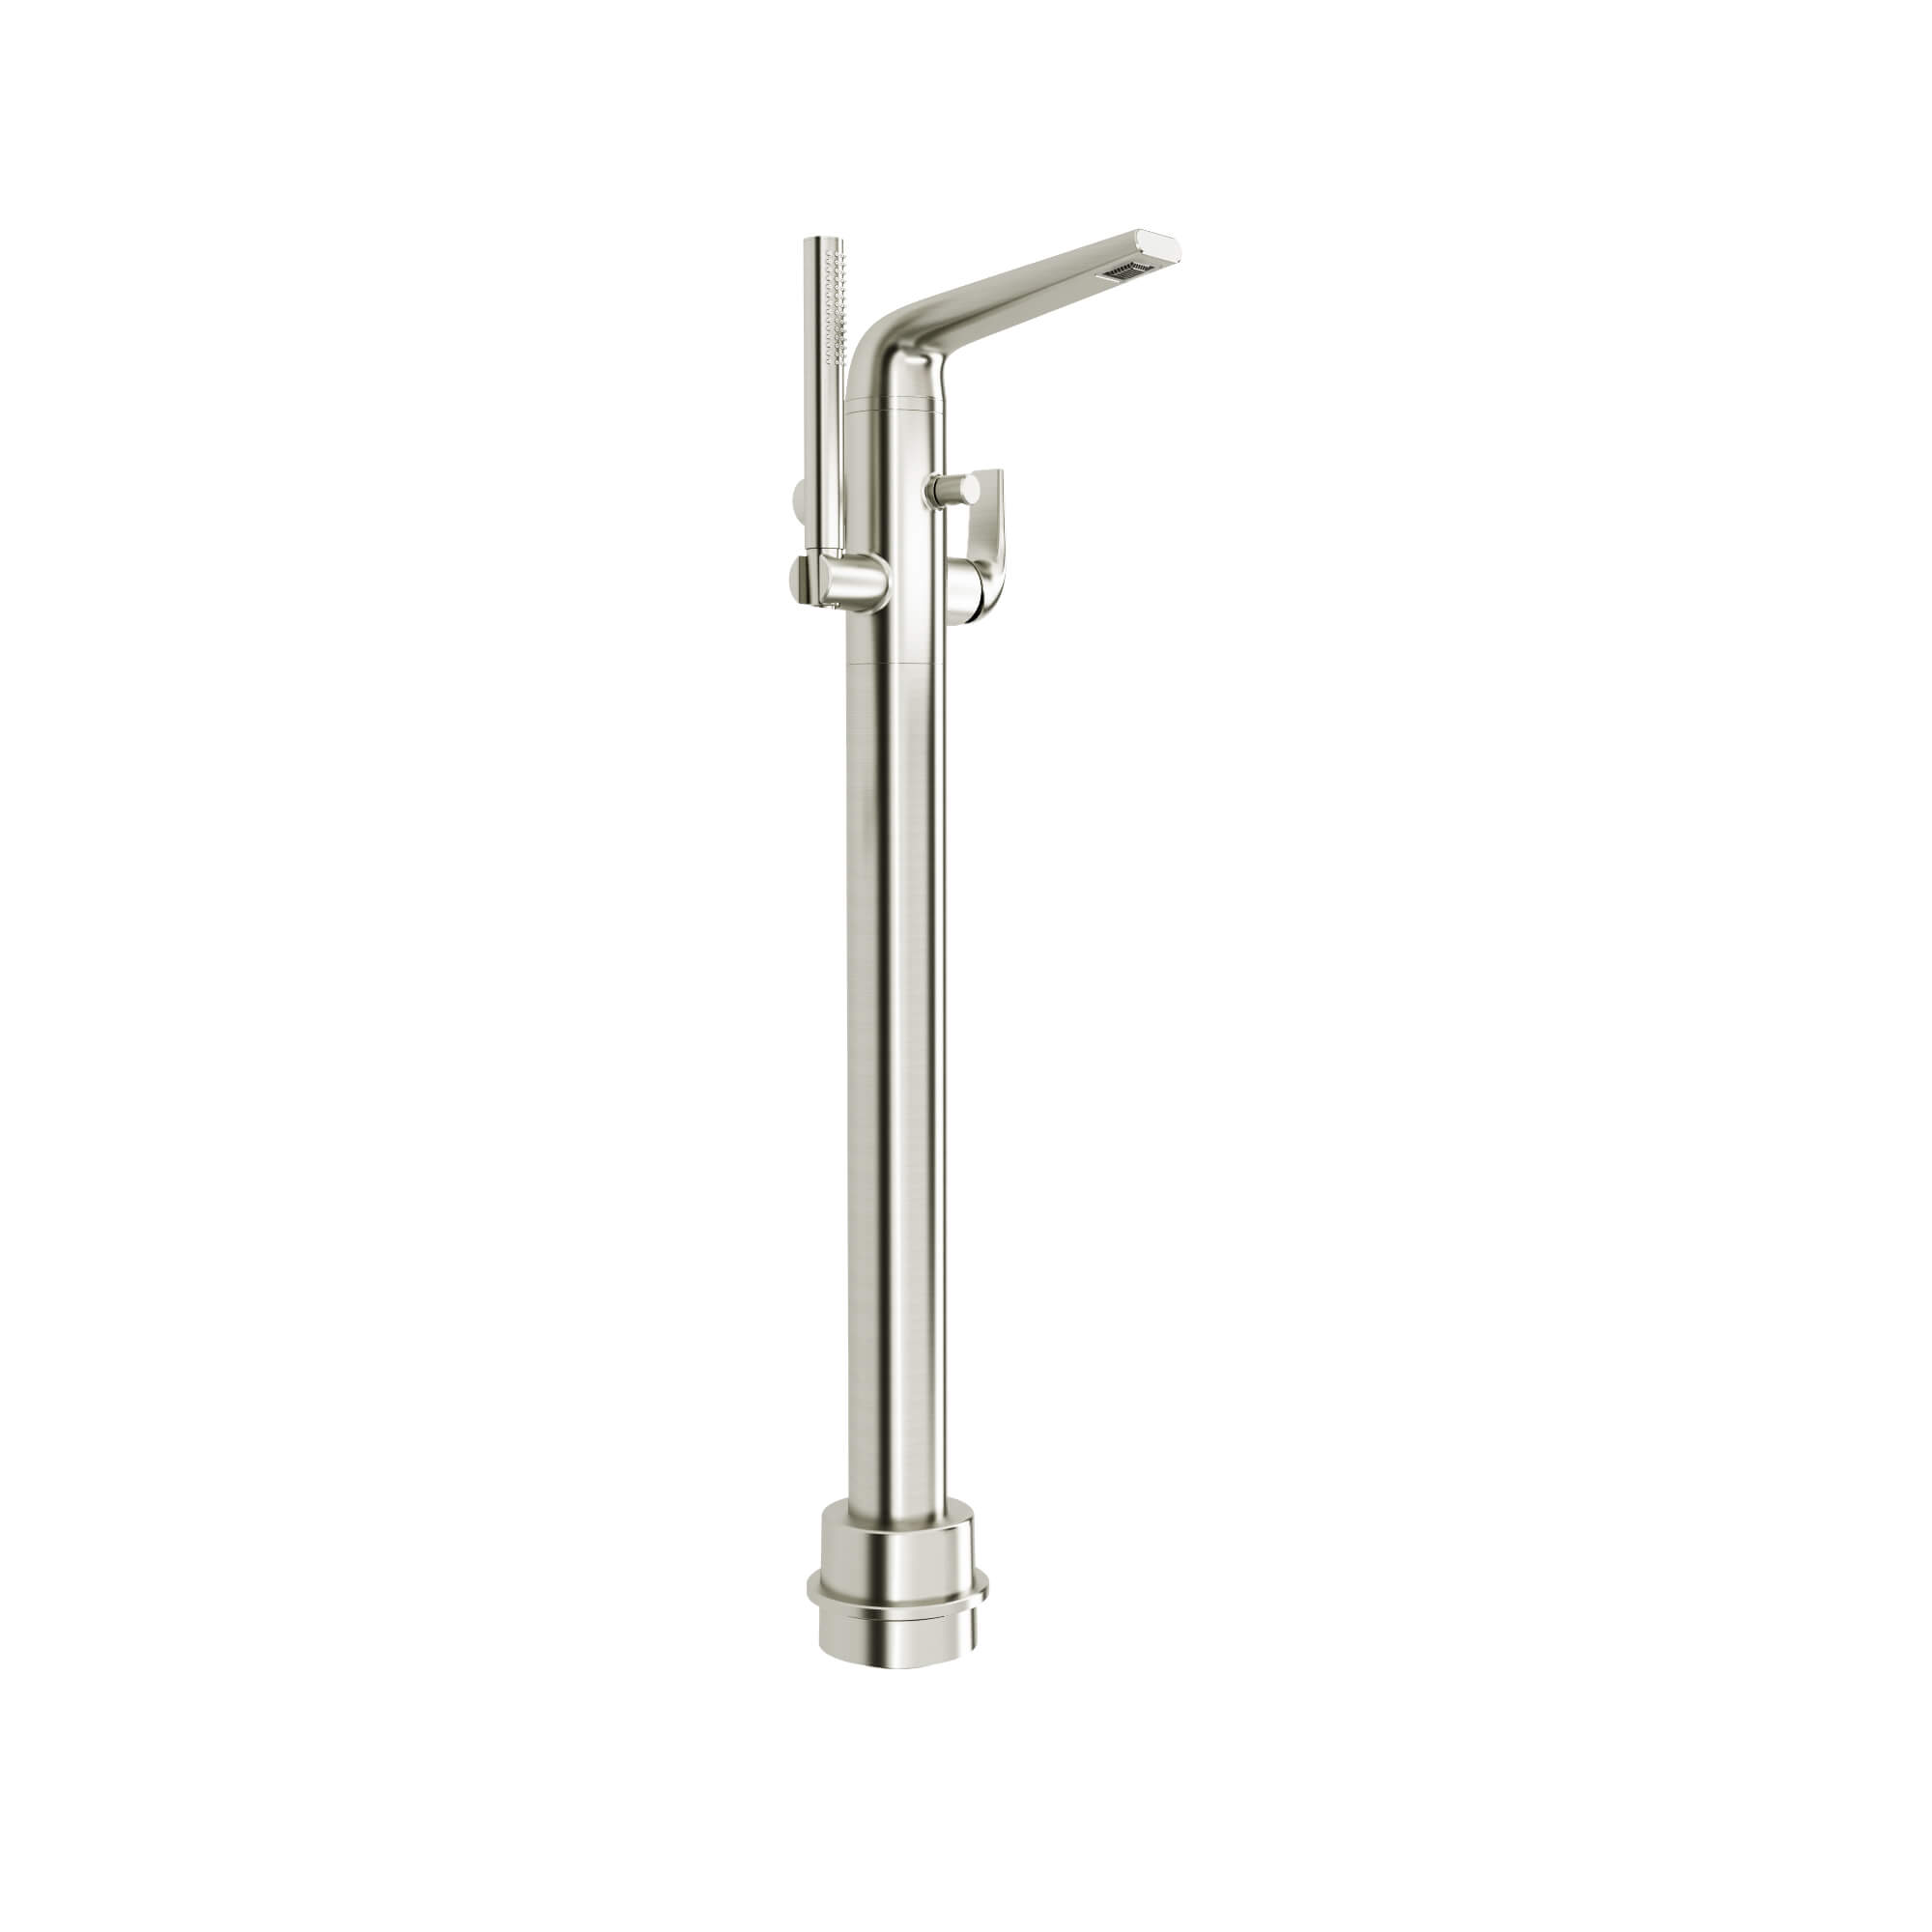 DXV Modulus Single Handle Floor Mount Bathtub Filler with Hand Shower and Lever Handle